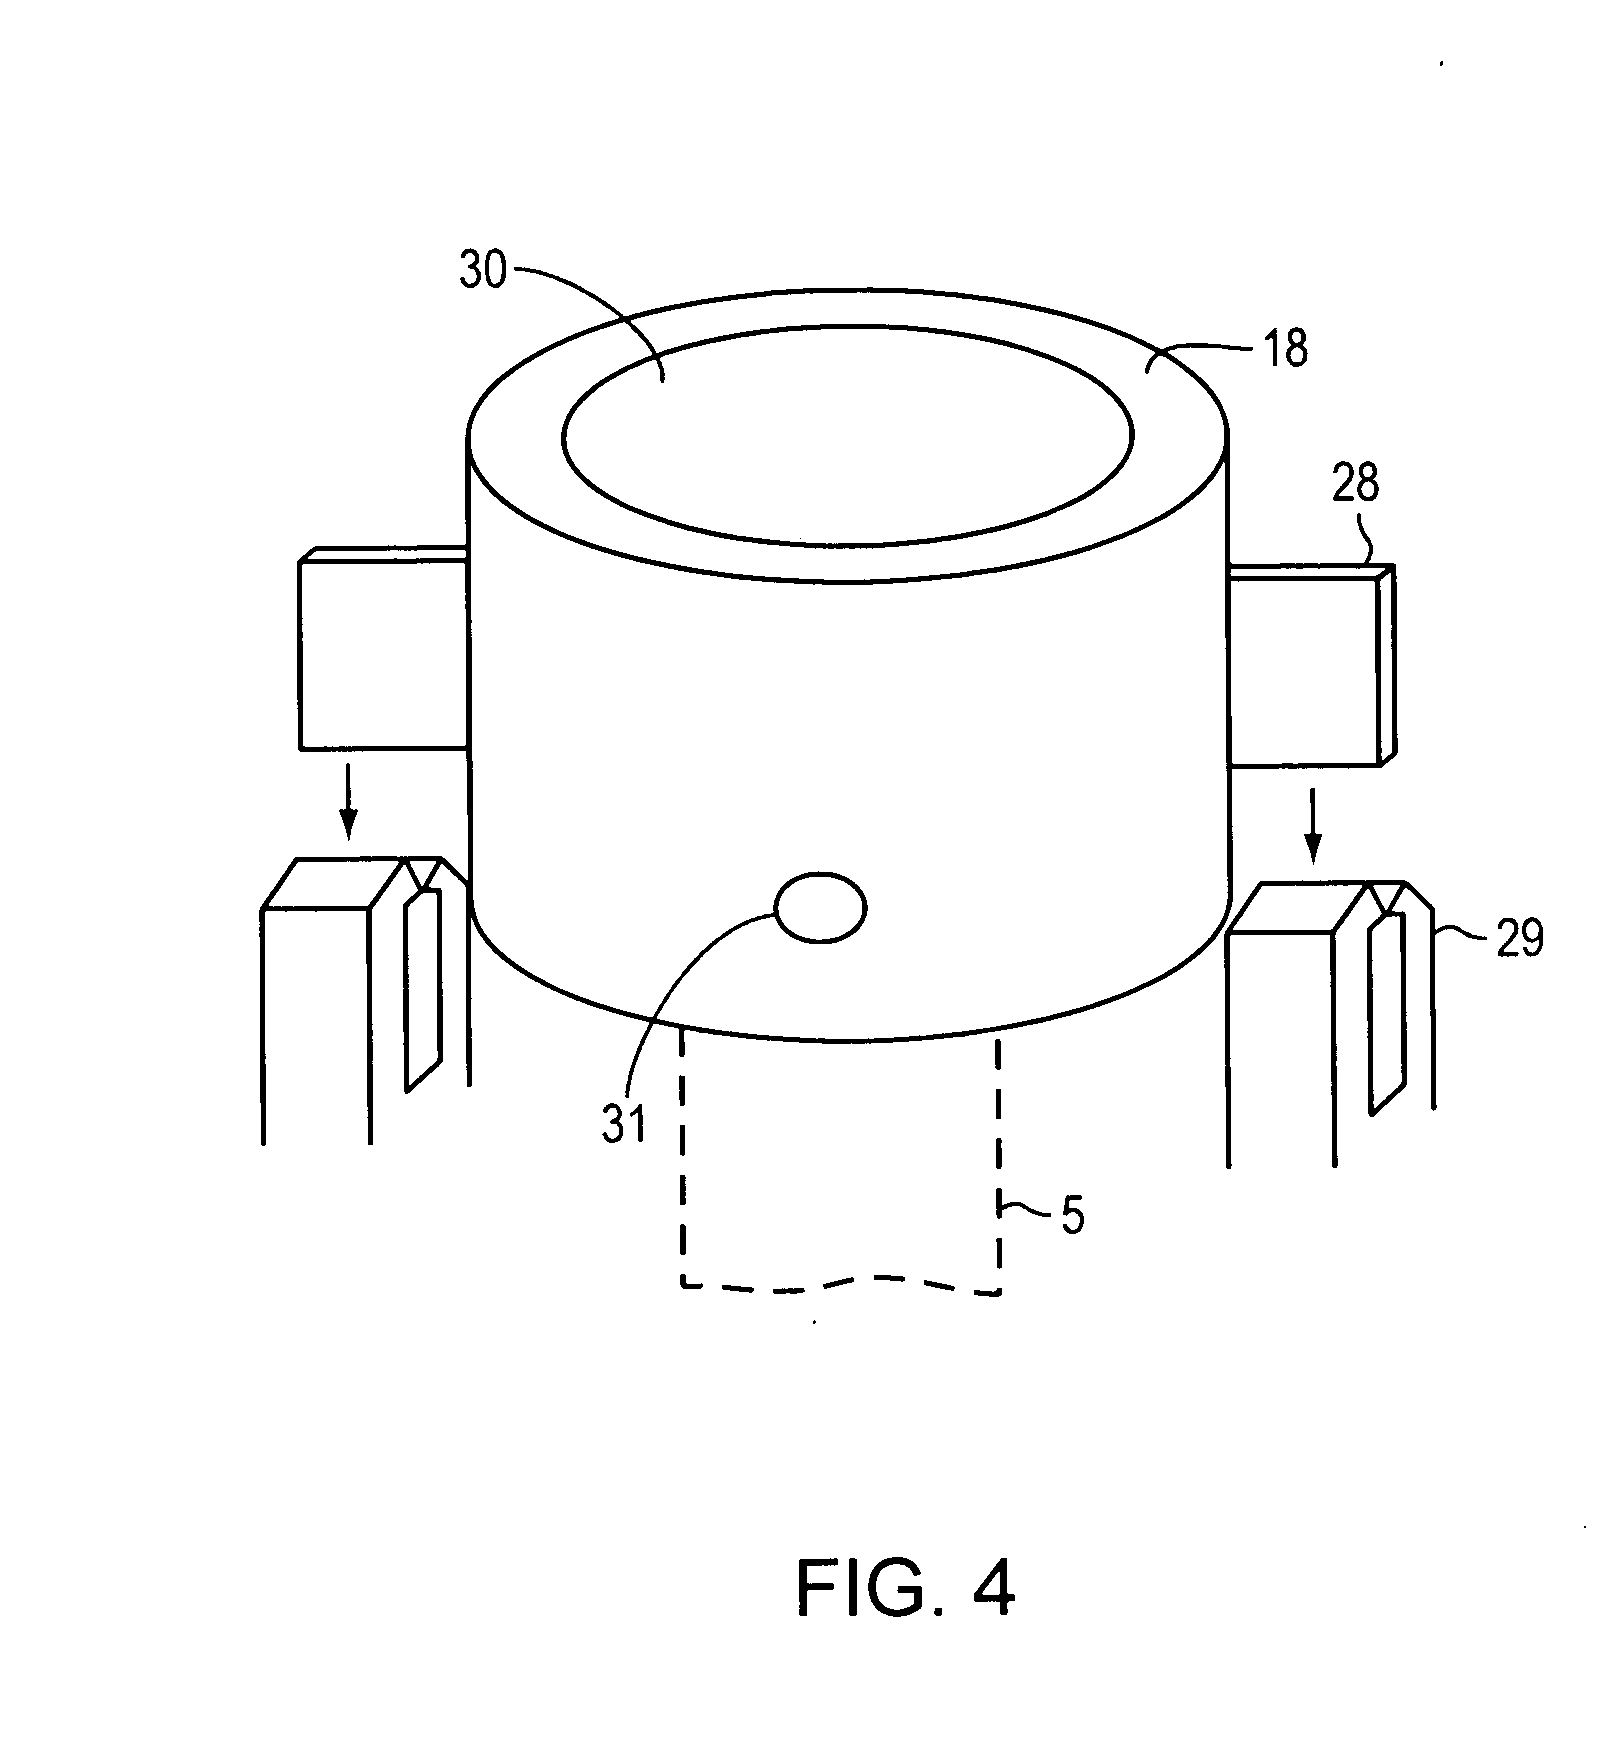 Cannula Insertion Device and Related Methods